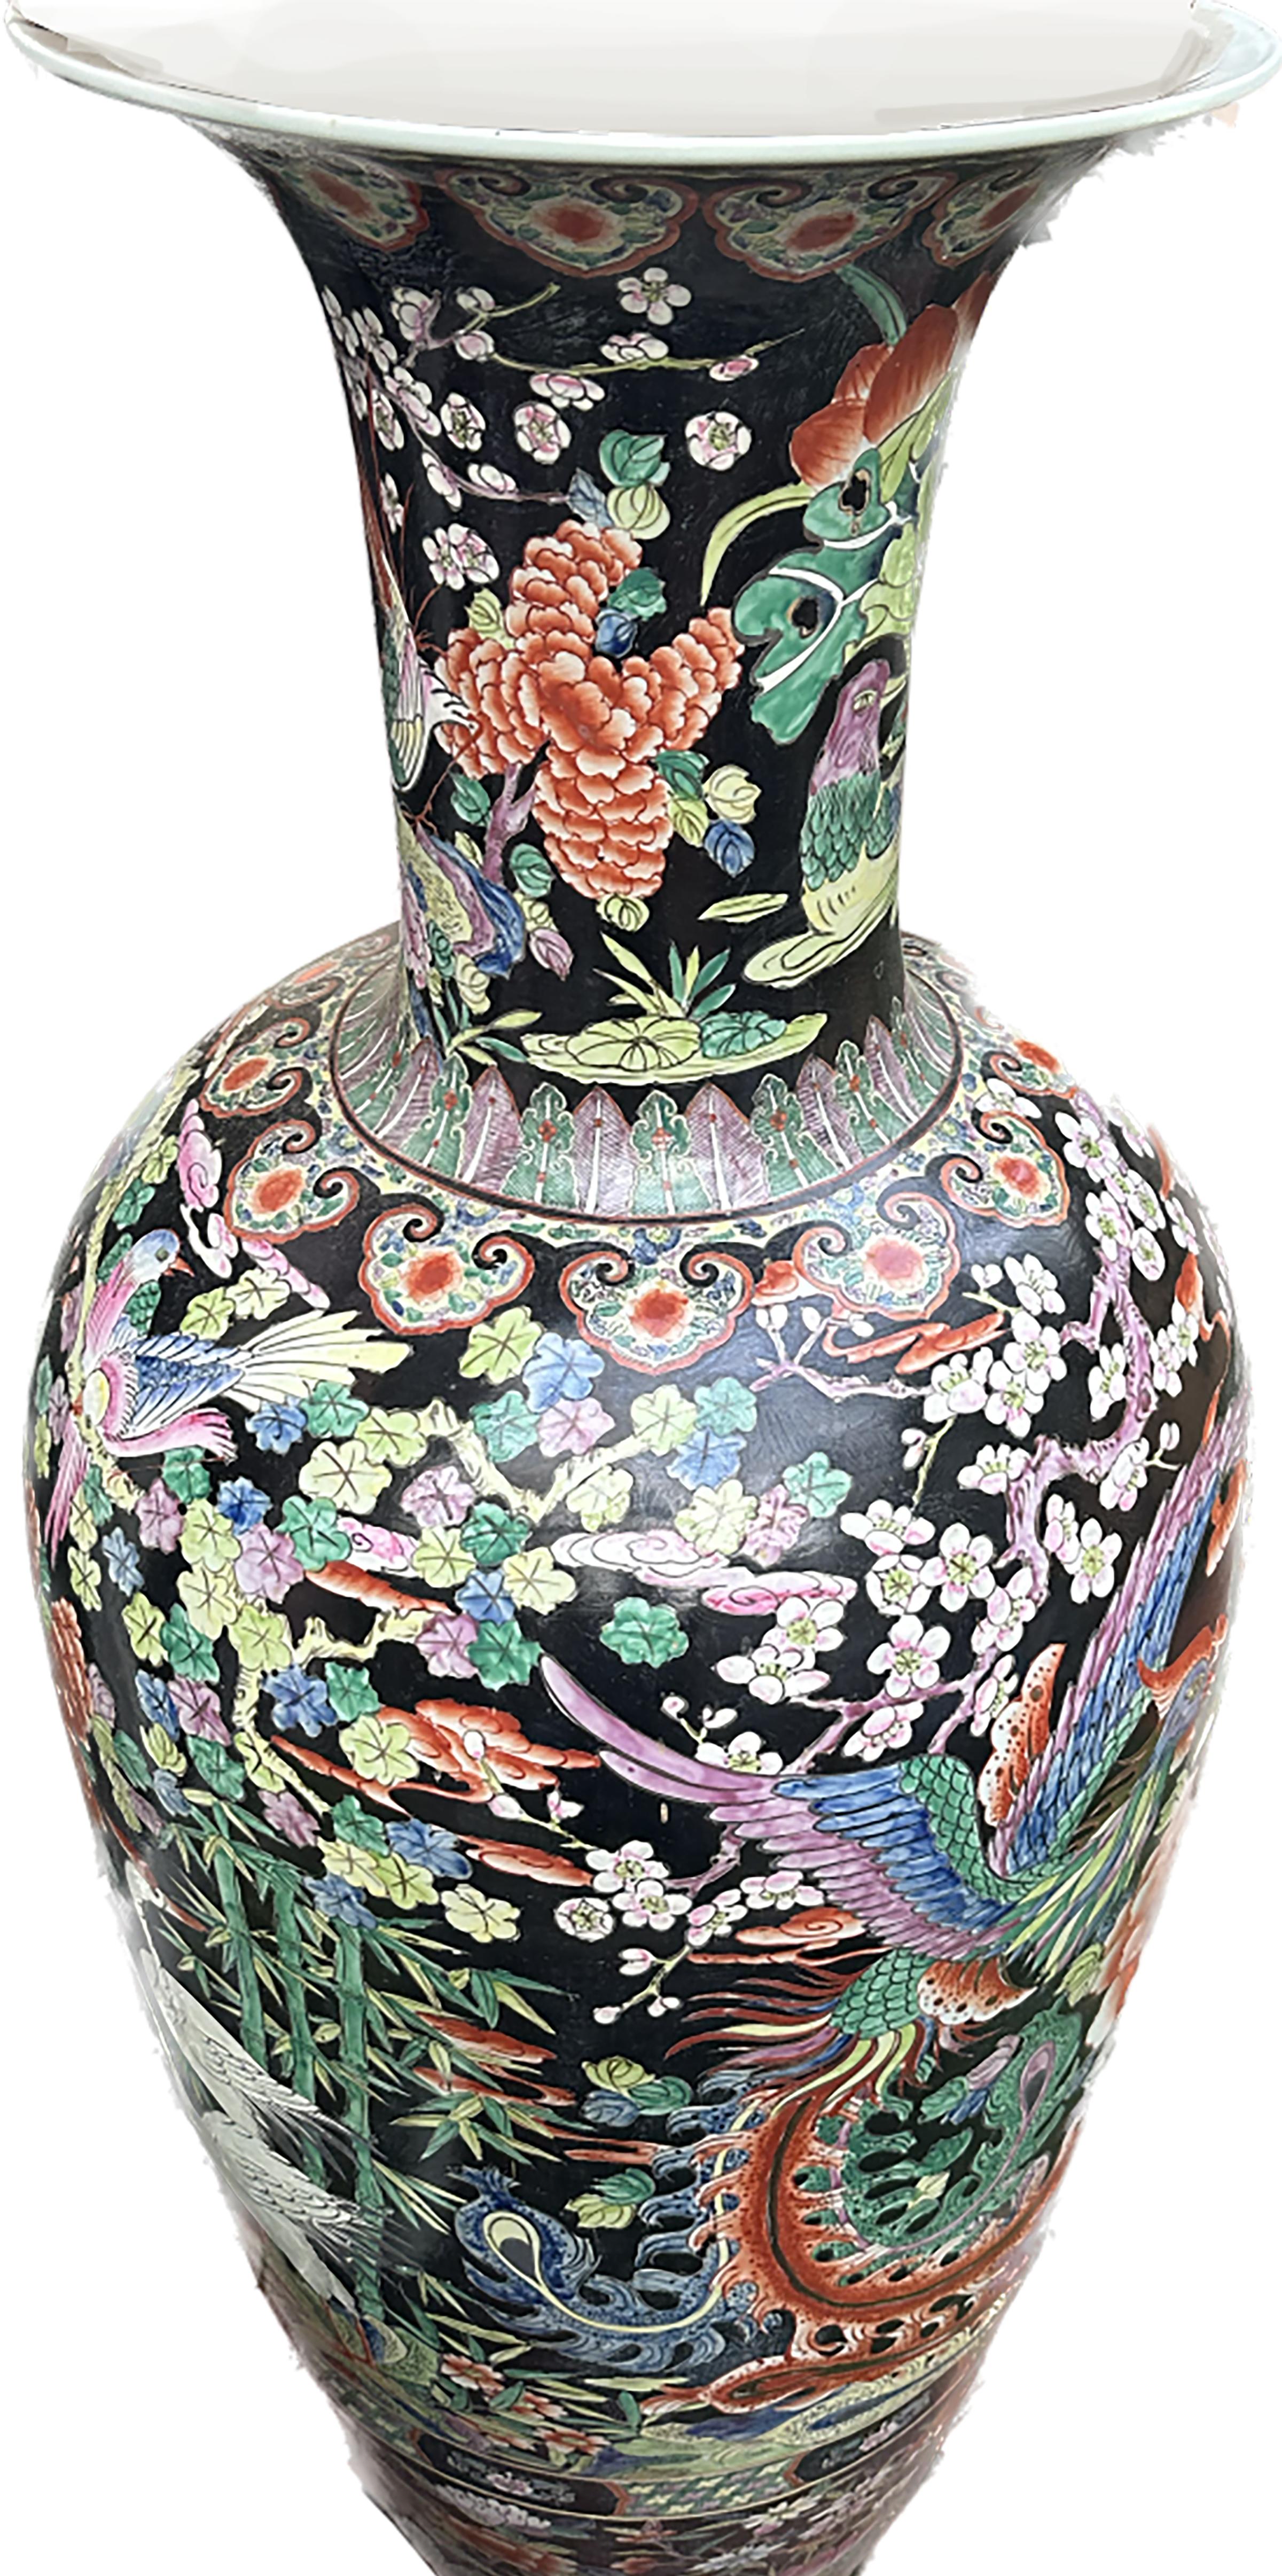 An exquisite pair of monumental hand painted Blackground Chinese porcelain Urns. lead based glaze. 

Bottle shaped body with an open neck is made of the finest porcelain. A collection of spring flora including hydrangeas, white cherry blossoms, and